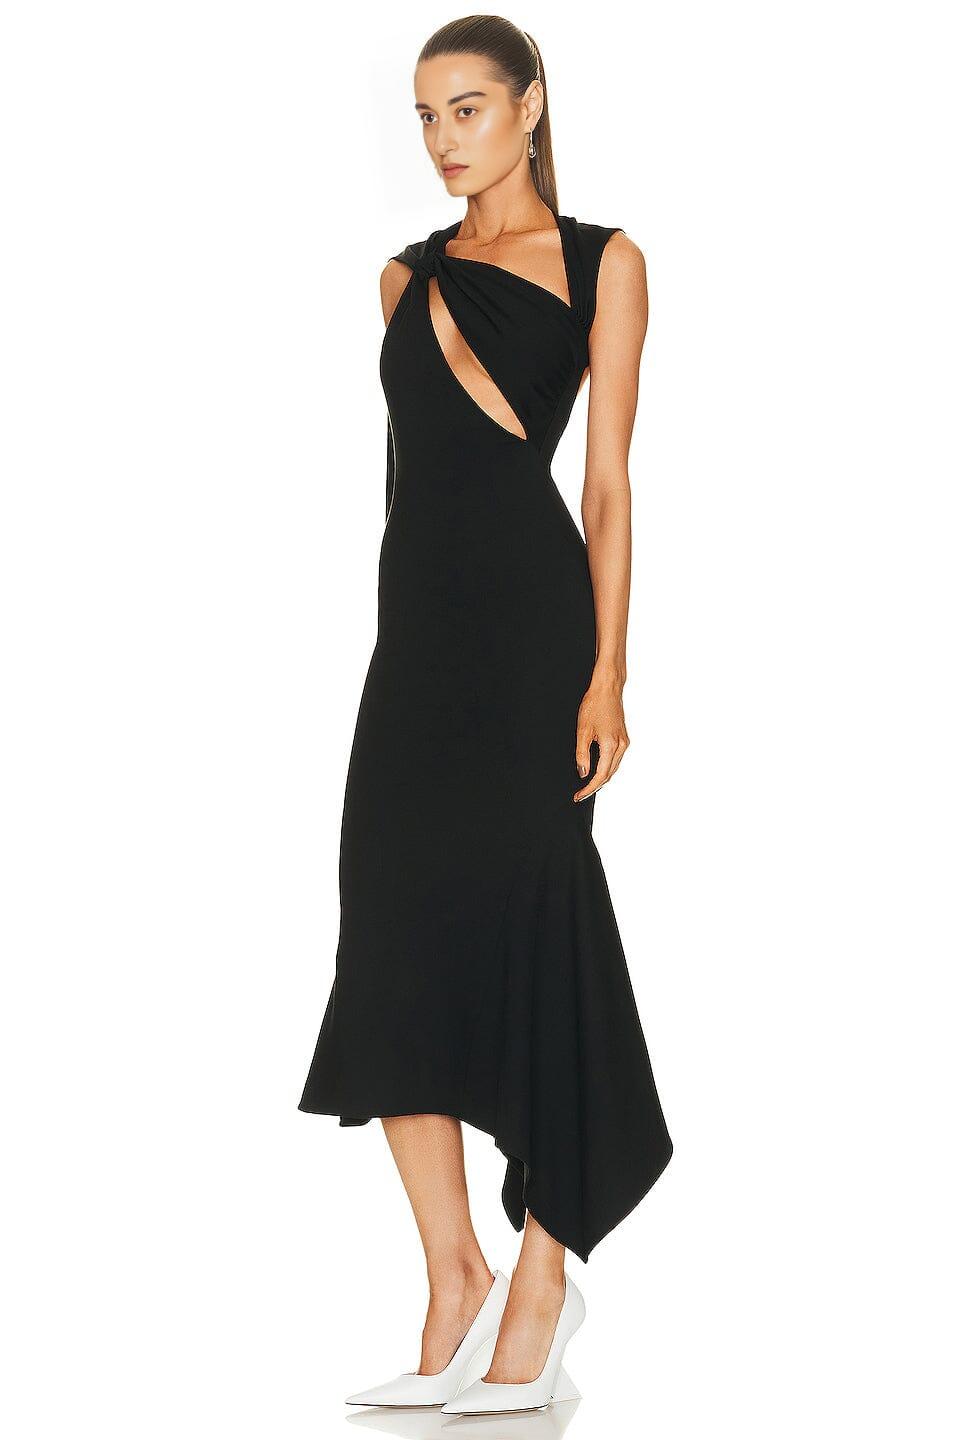 BACKLESS CUT OUT DRESS IN BLACK